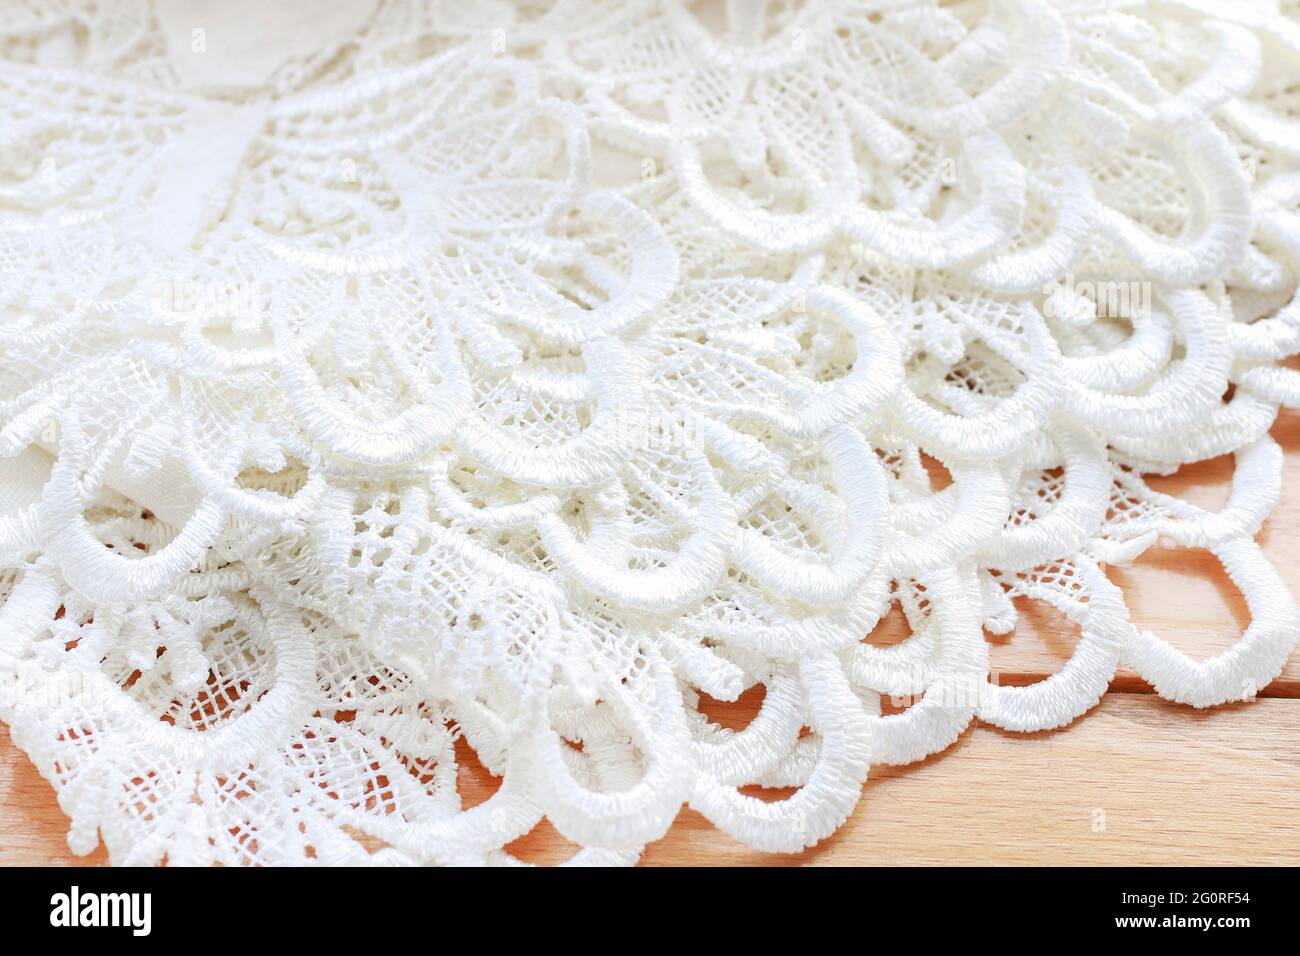 SAMPLE French Lace, White Lace Fabric, White Lace Material, Lace